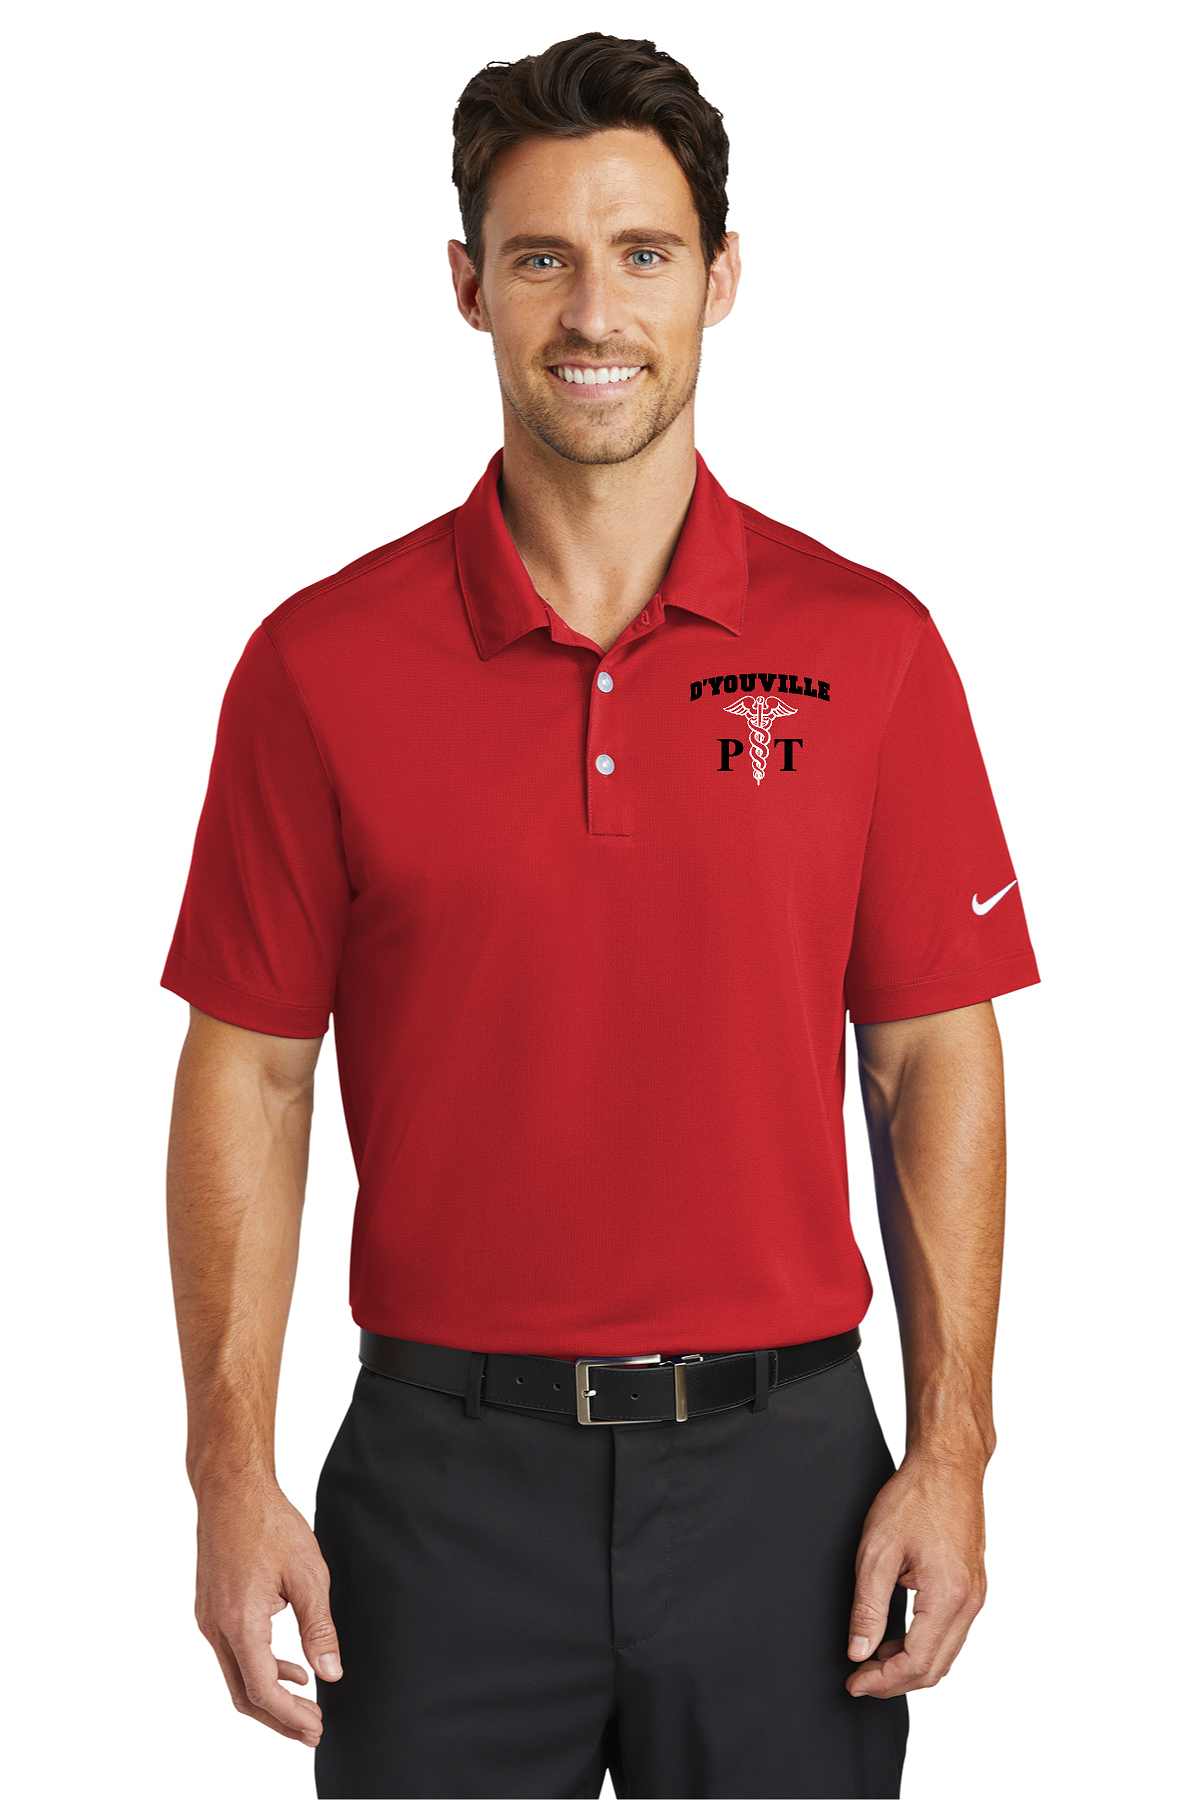 D'Youville Physical Therapy 637167 Nike Dri-FIT Vertical Mesh Polo